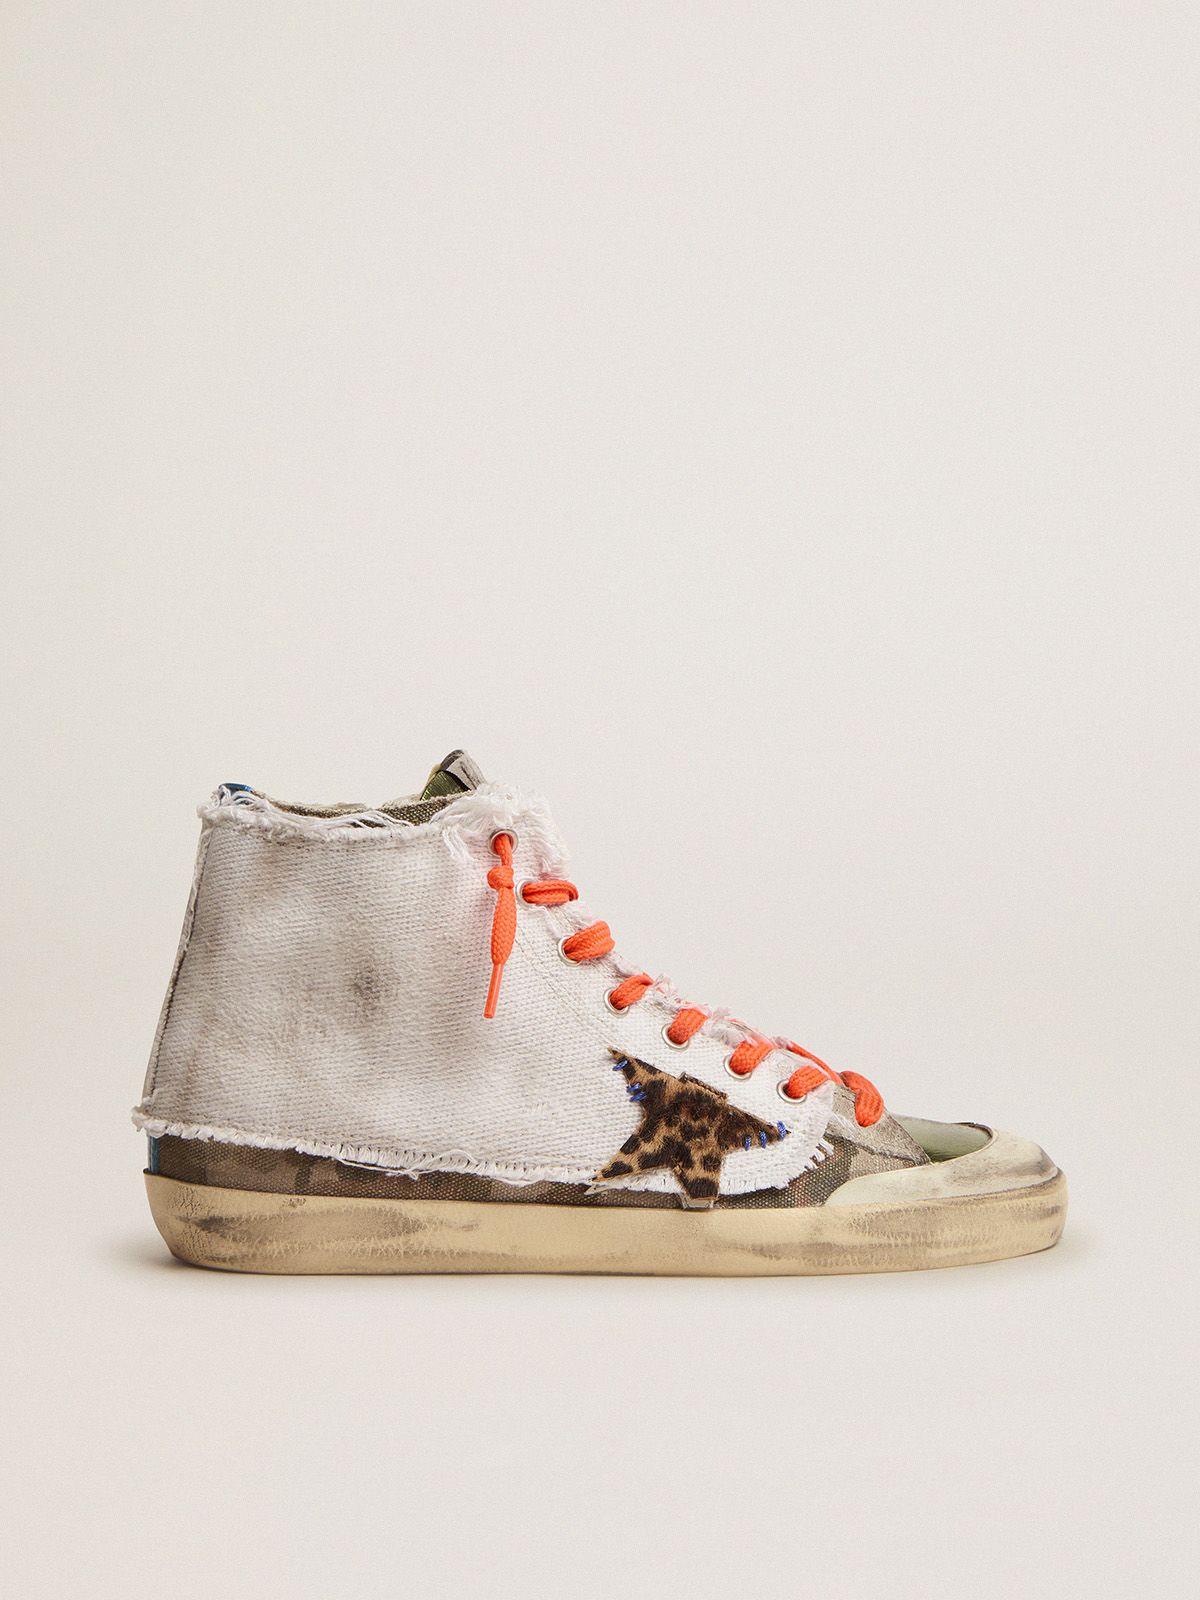 golden goose Francy and camouflage sneakers canvas with Penstar print white LAB superimposed